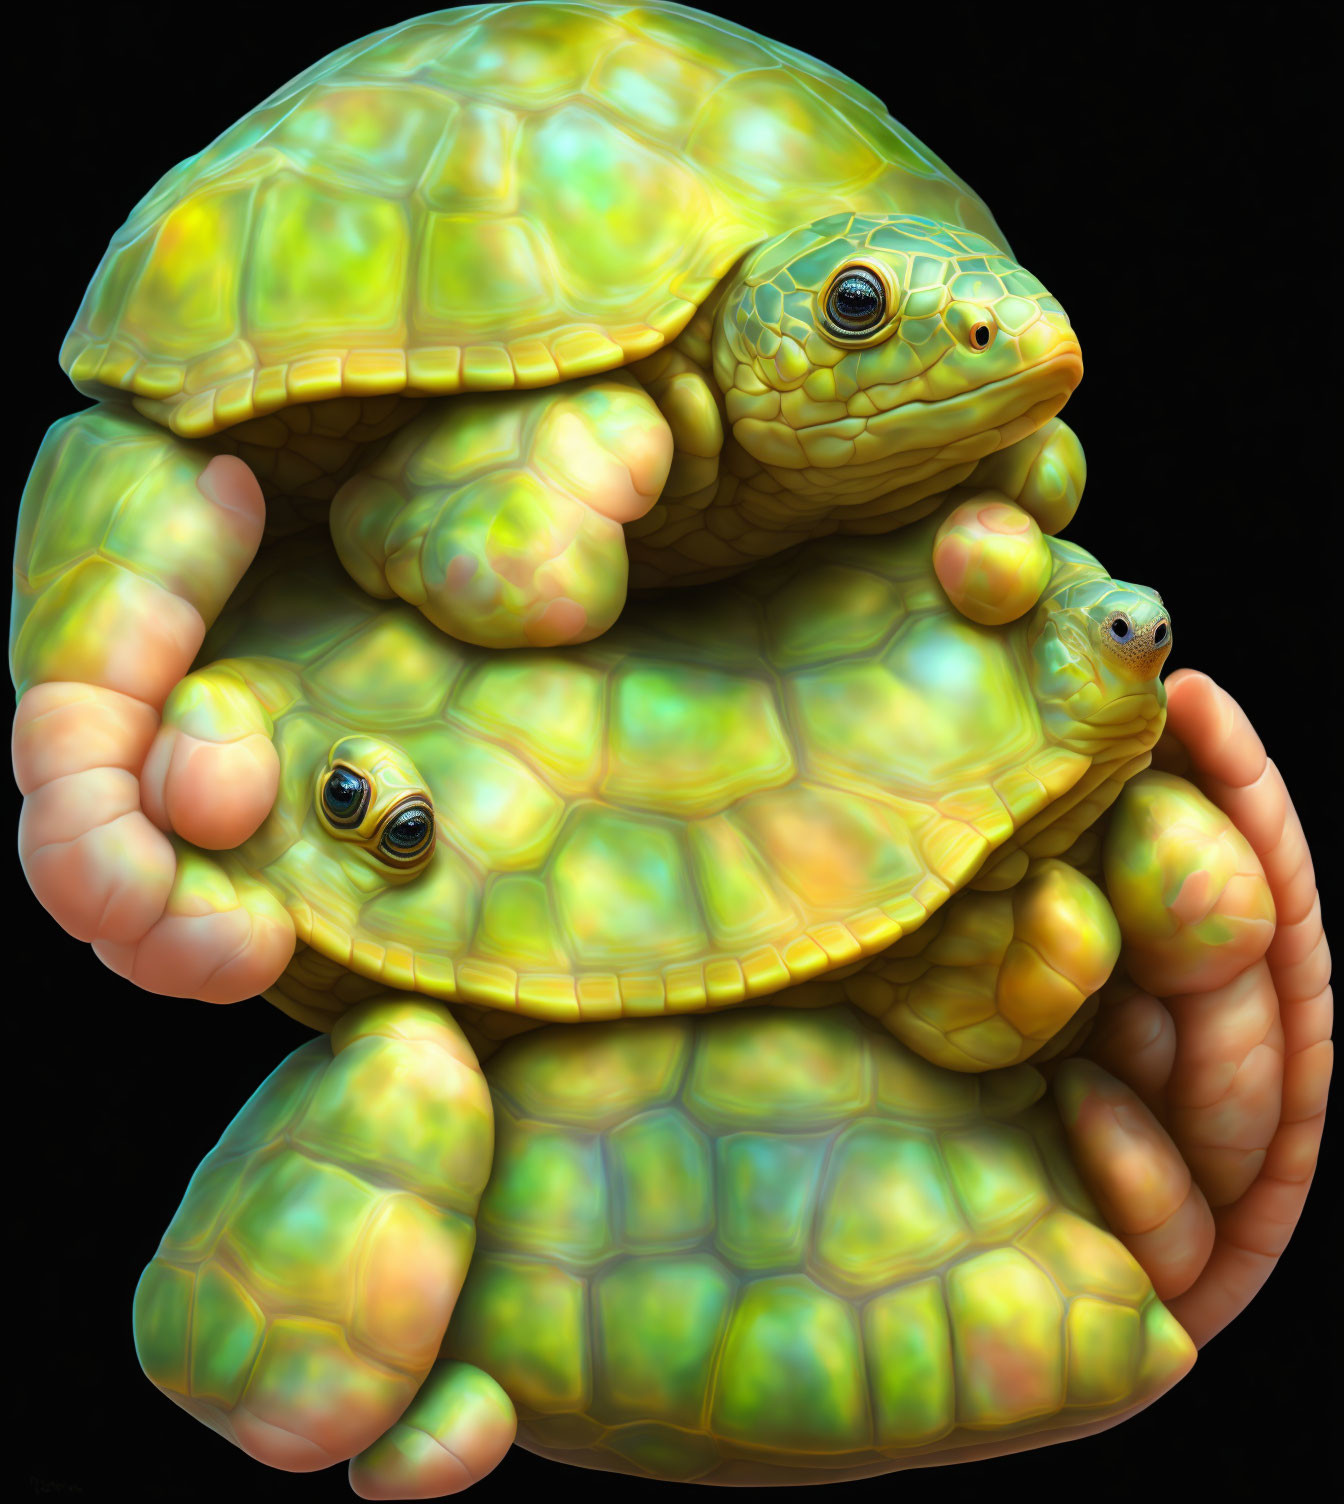 Surreal digital artwork of a multi-headed turtle with glossy texture